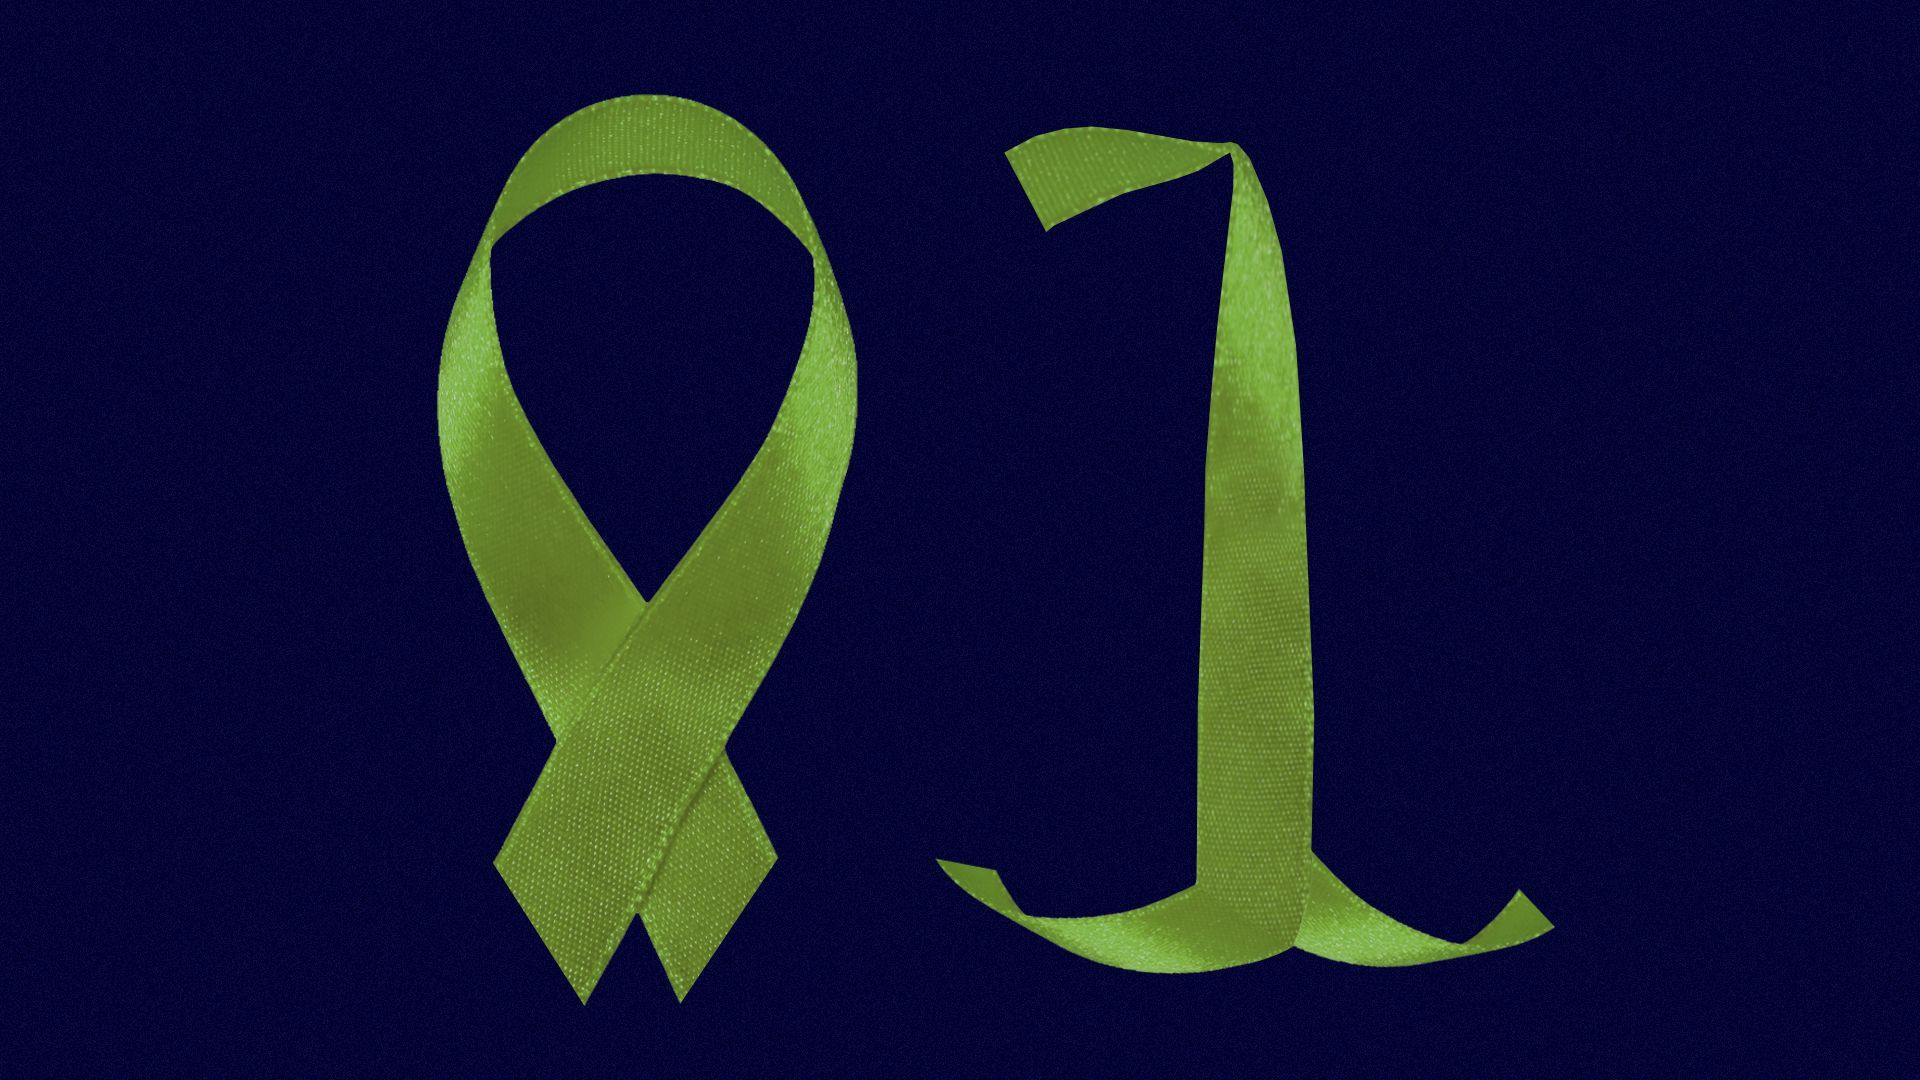 Illustration of two charity ribbons bent to resemble a zero and one binary code